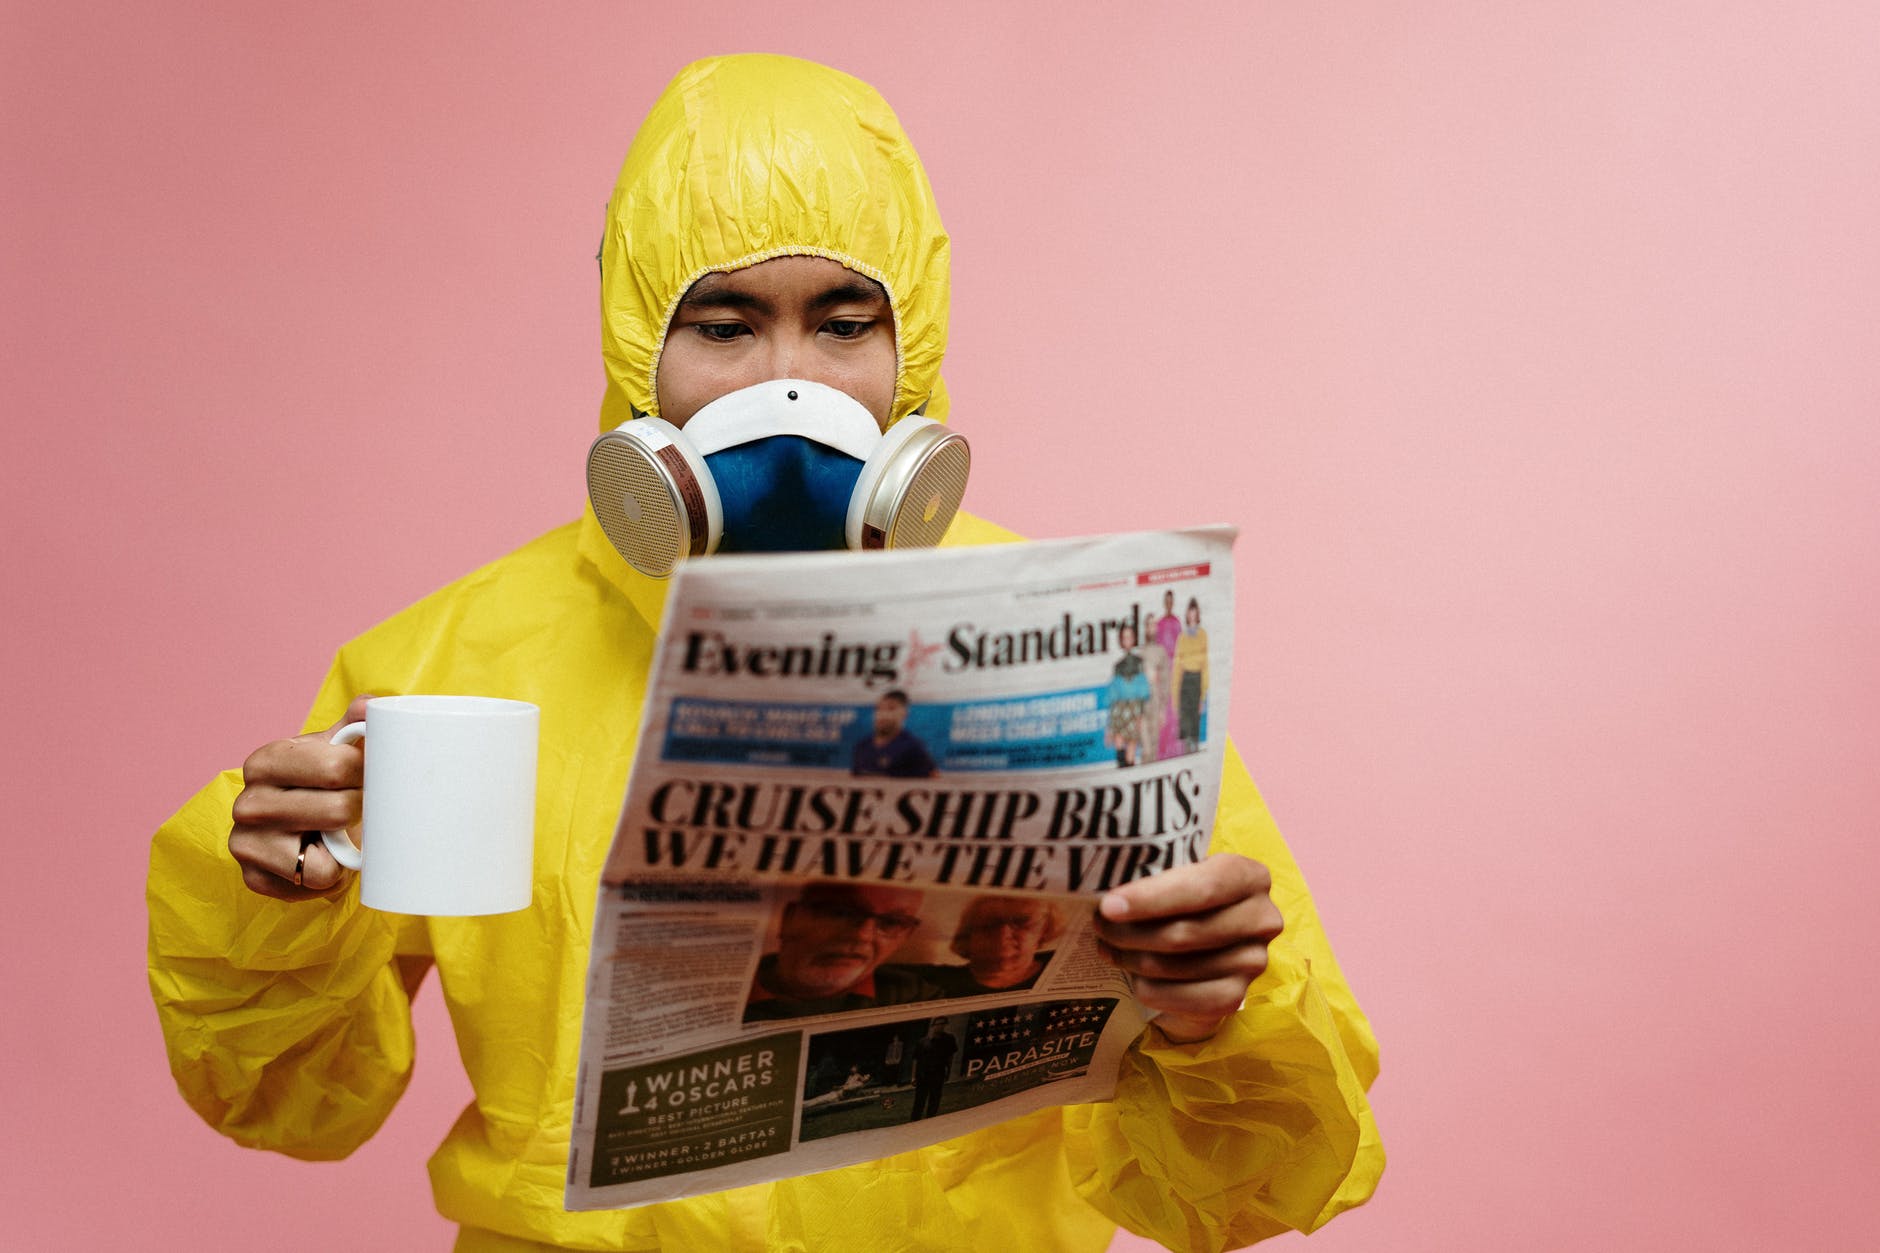 A person holding a mug and a newspaper, dressed in a yellow hazmat suit to suggest reading the news during Covid19.